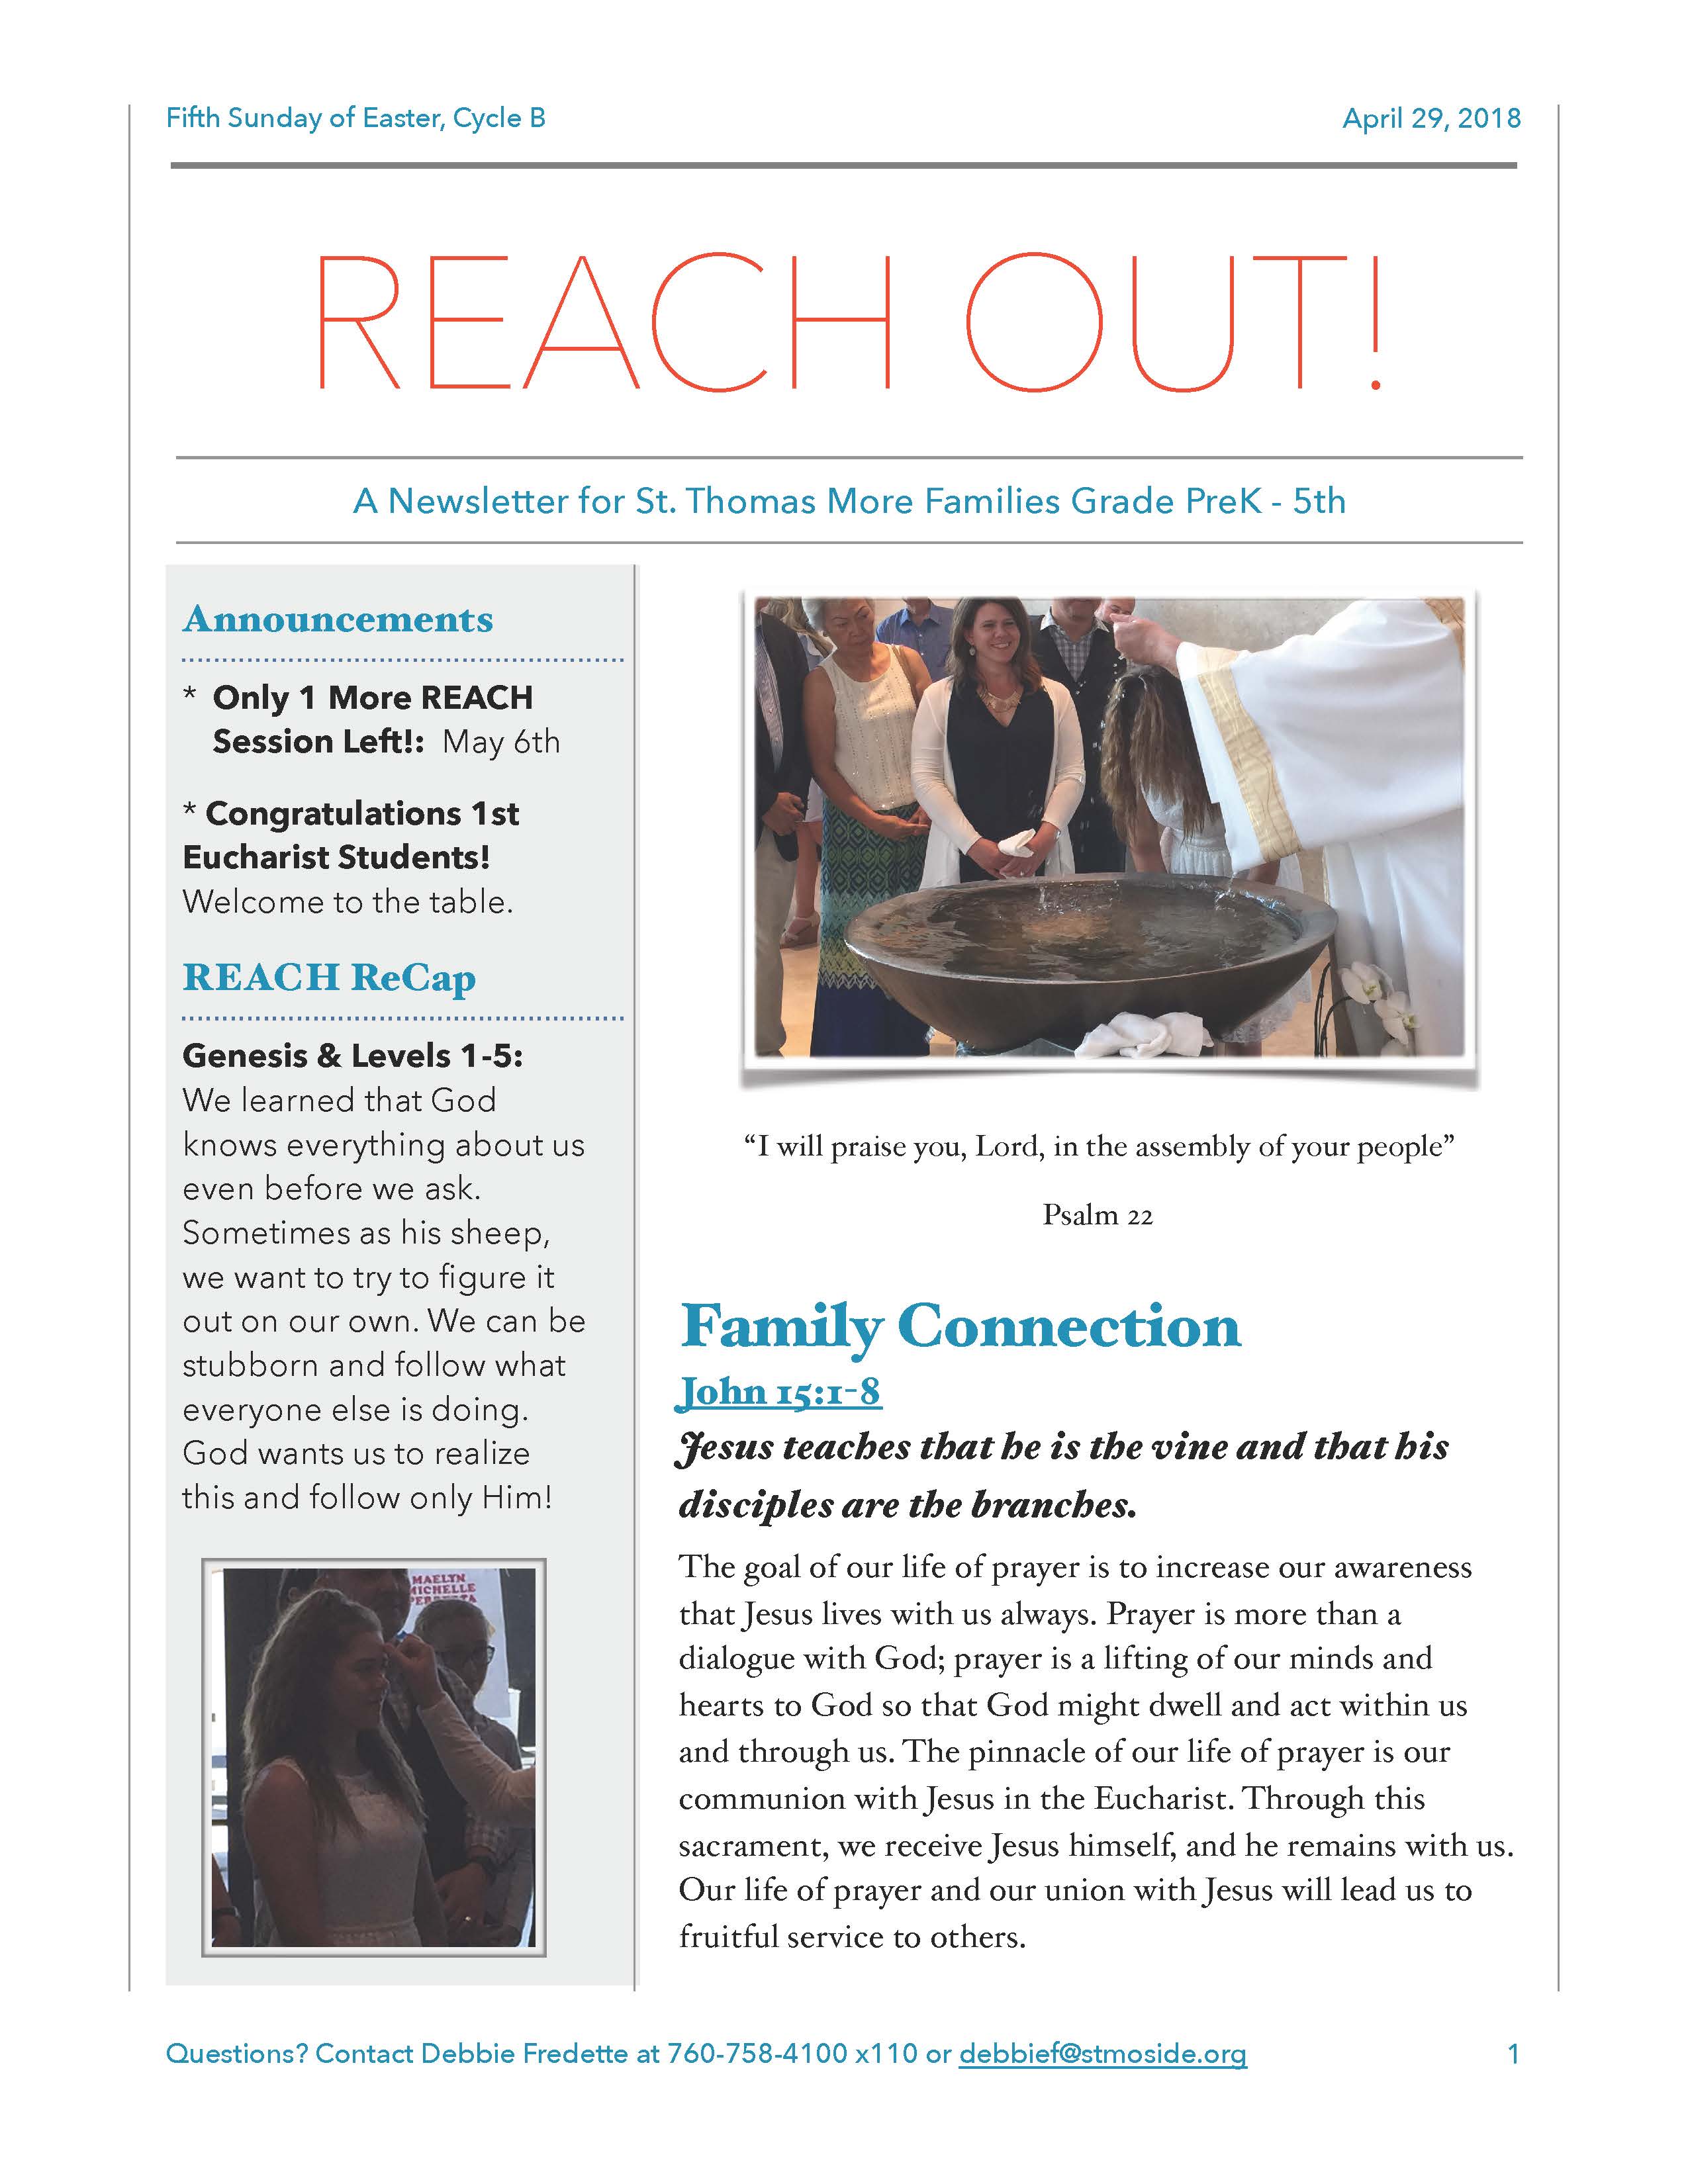 REACH Out Newsletter April 29, 2018